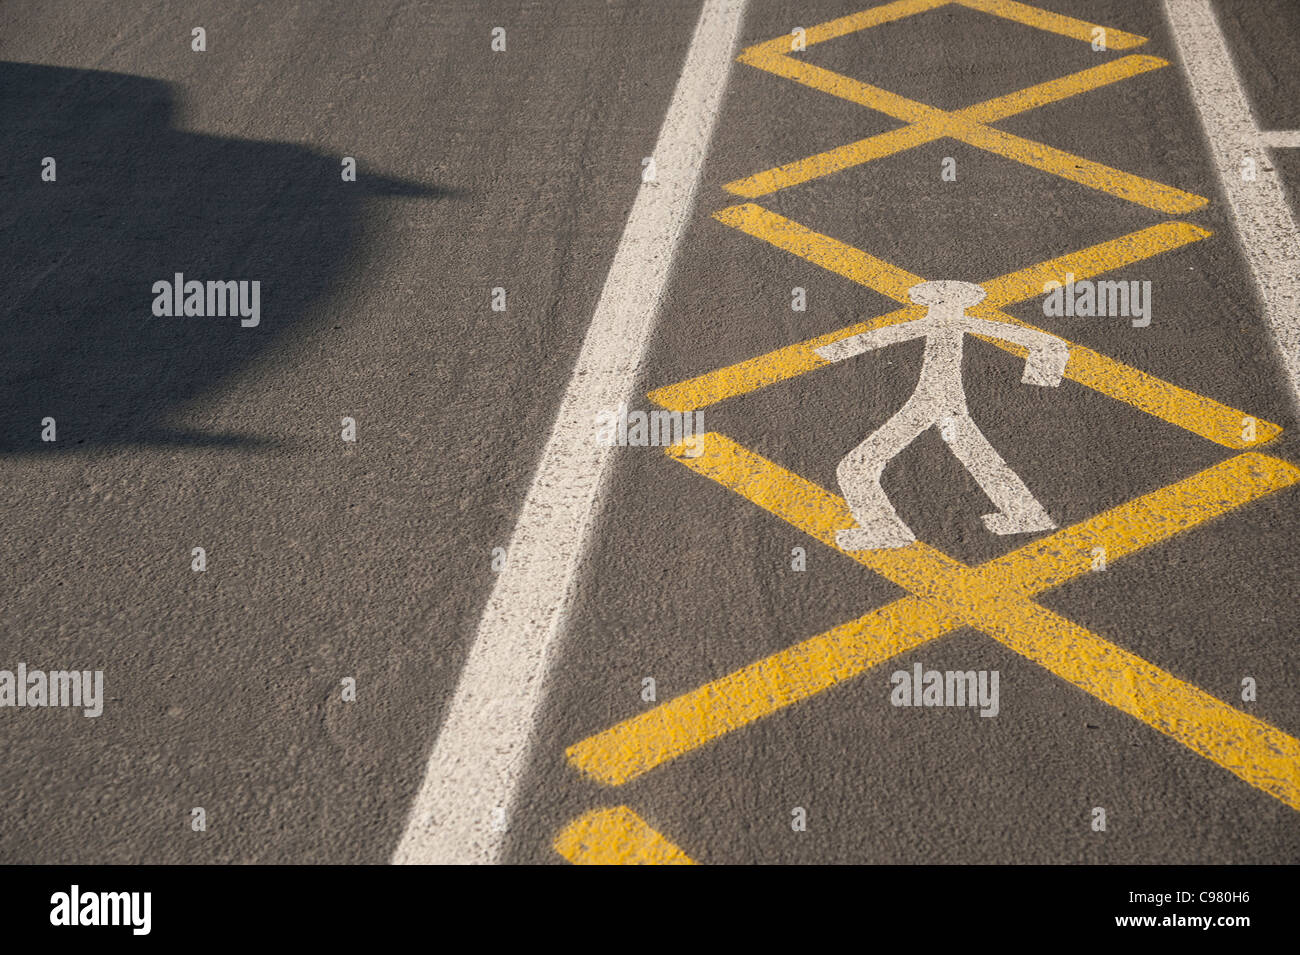 A safe zone for pedestrians to walk marked out on the ground with an icon, UK Stock Photo